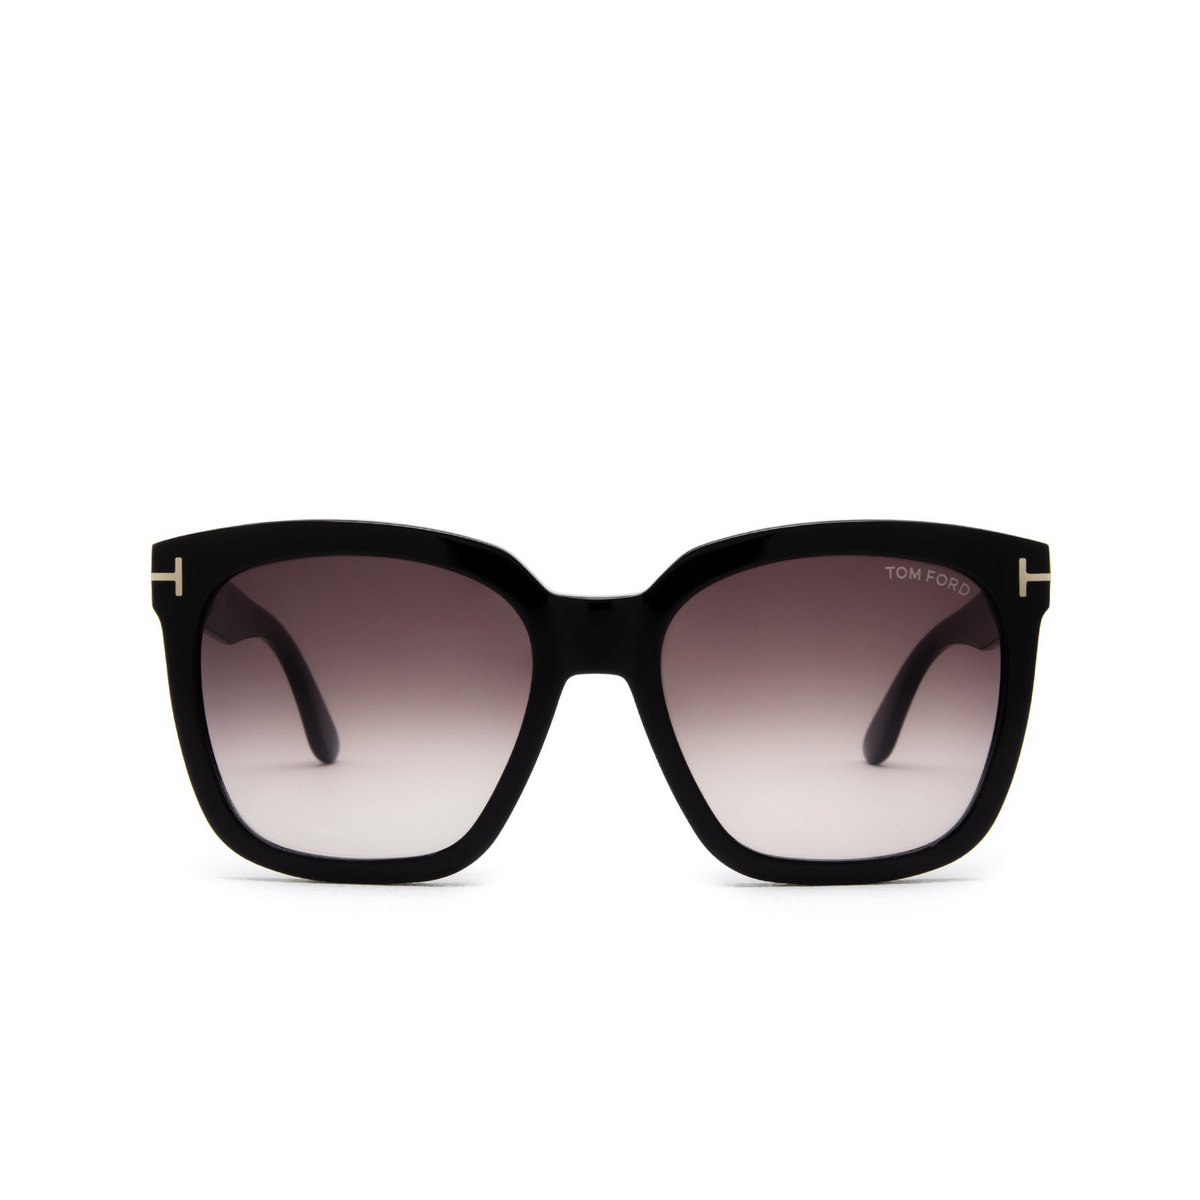 Tom Ford AMARRA Sunglasses 01T Black - front view